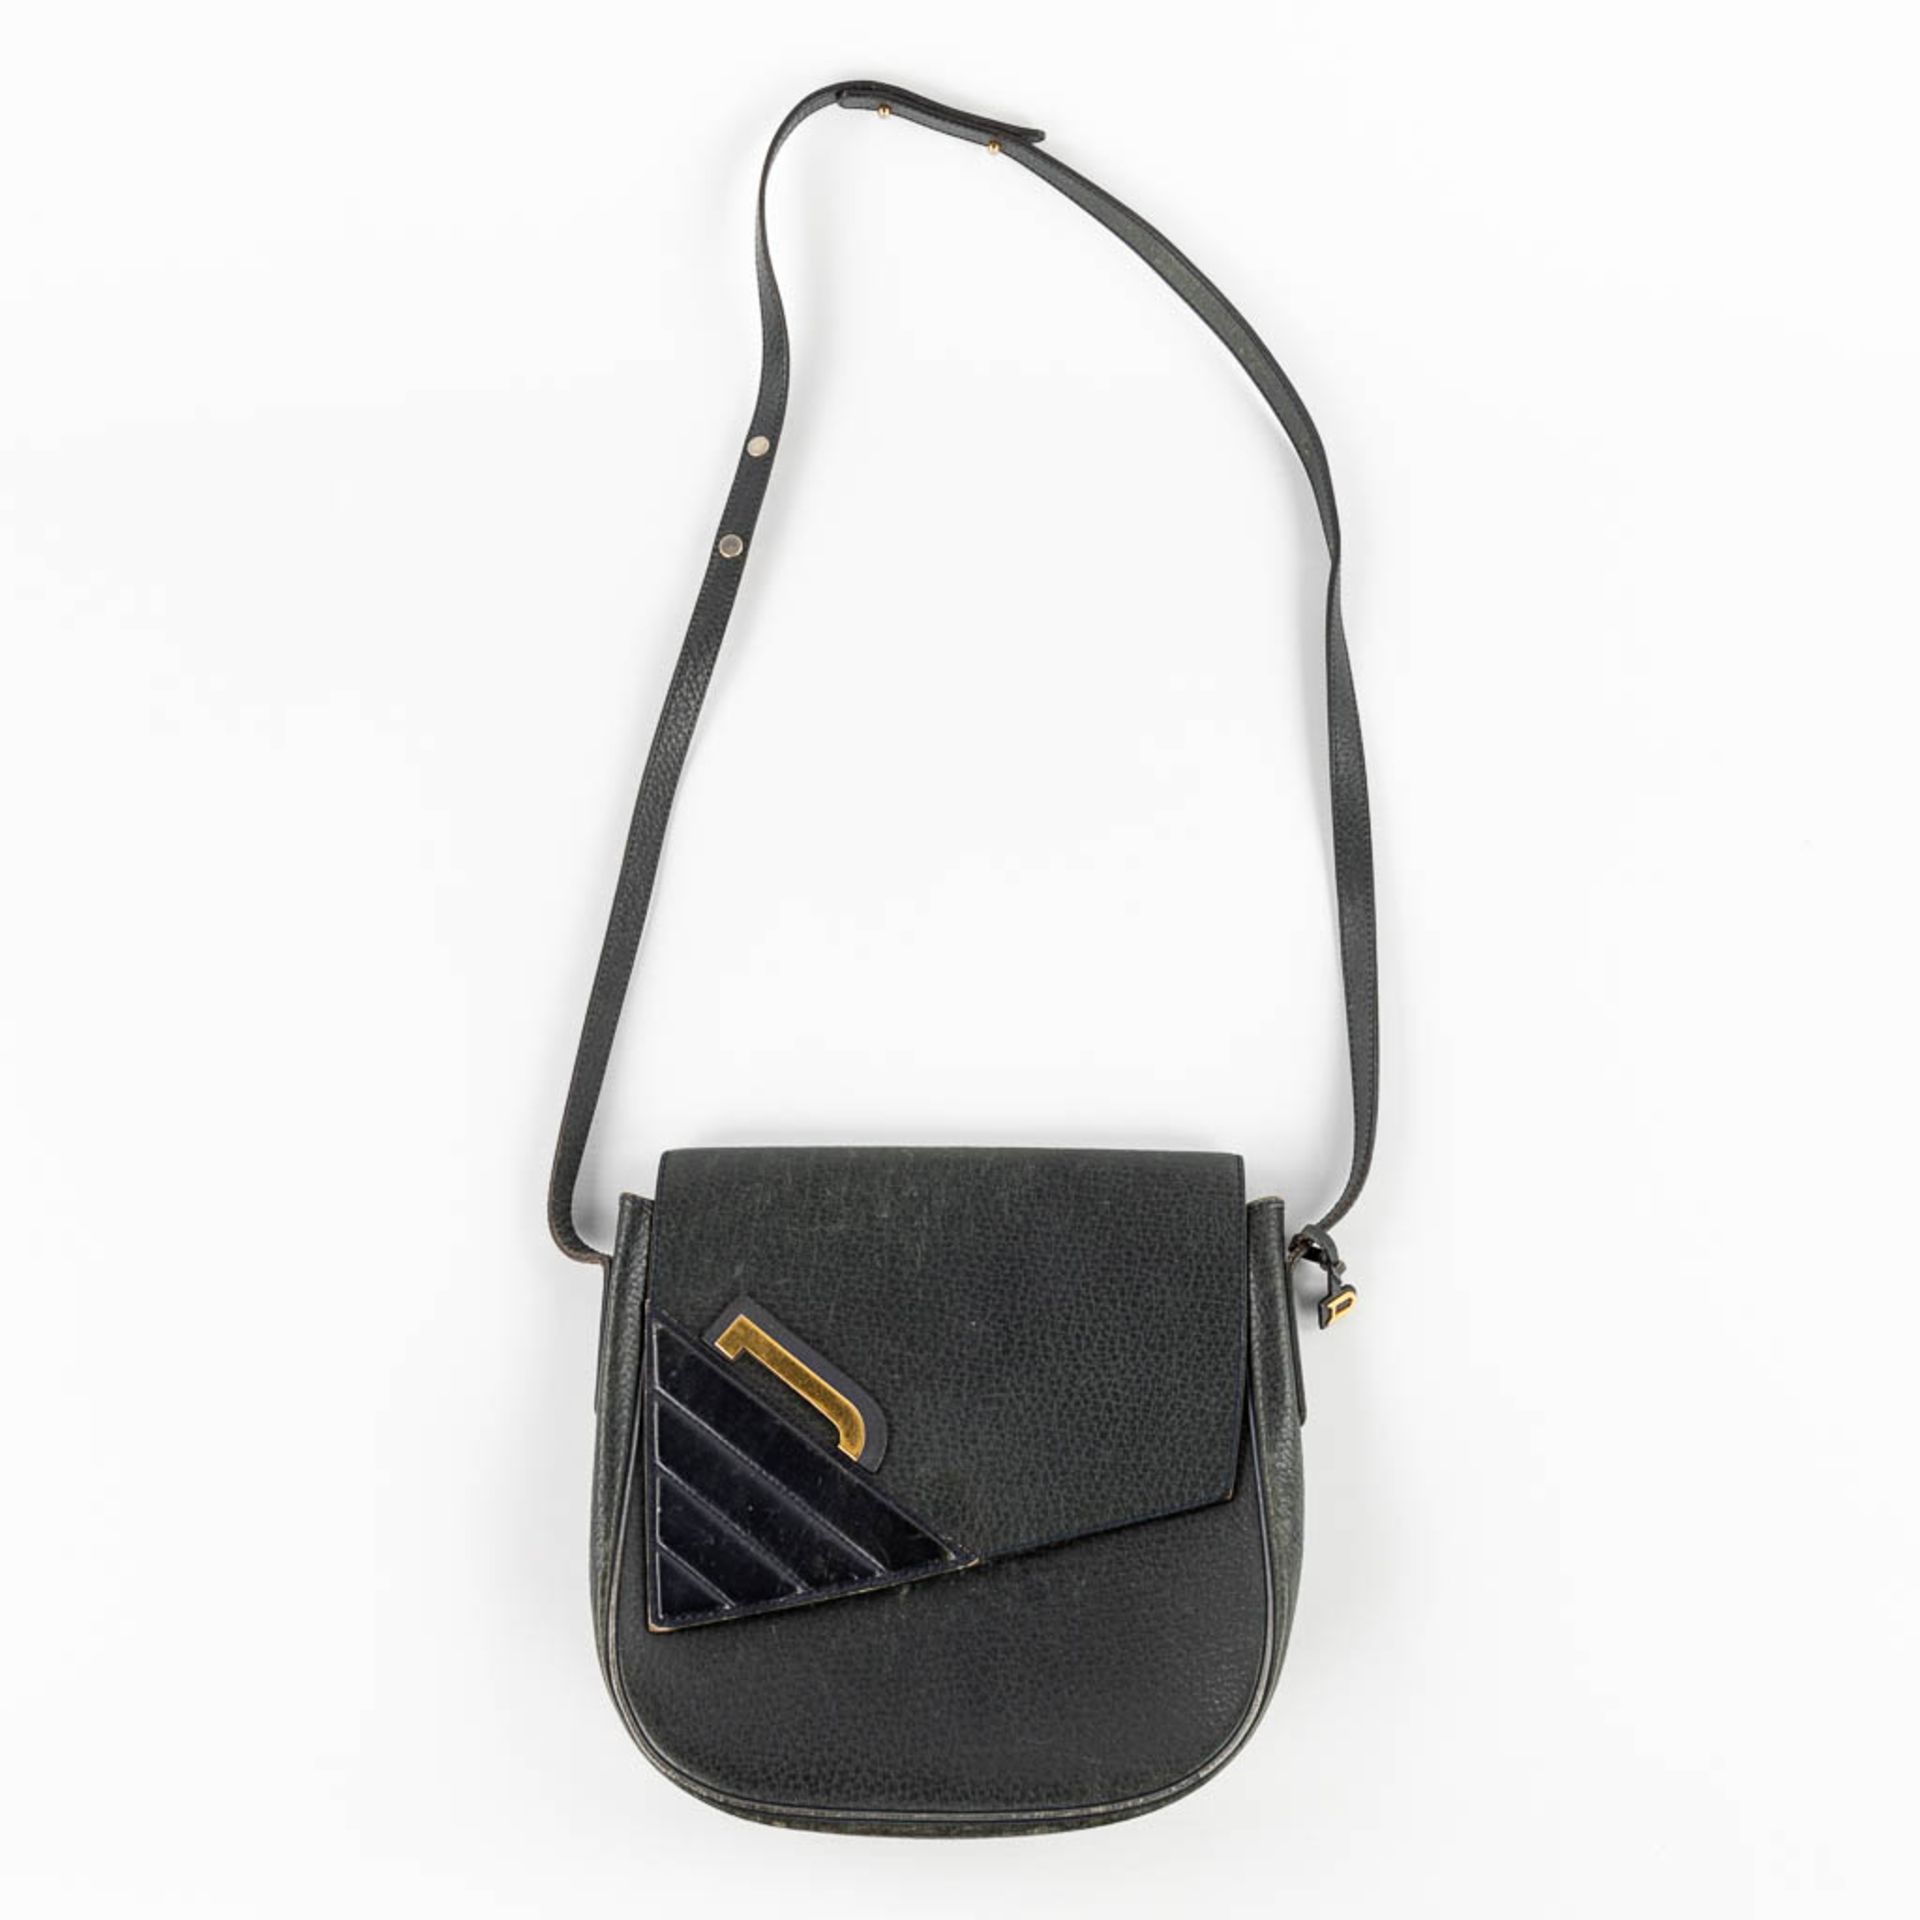 Delvaux, three handbags made of black leather. (W:28 x H:22 cm) - Image 35 of 41